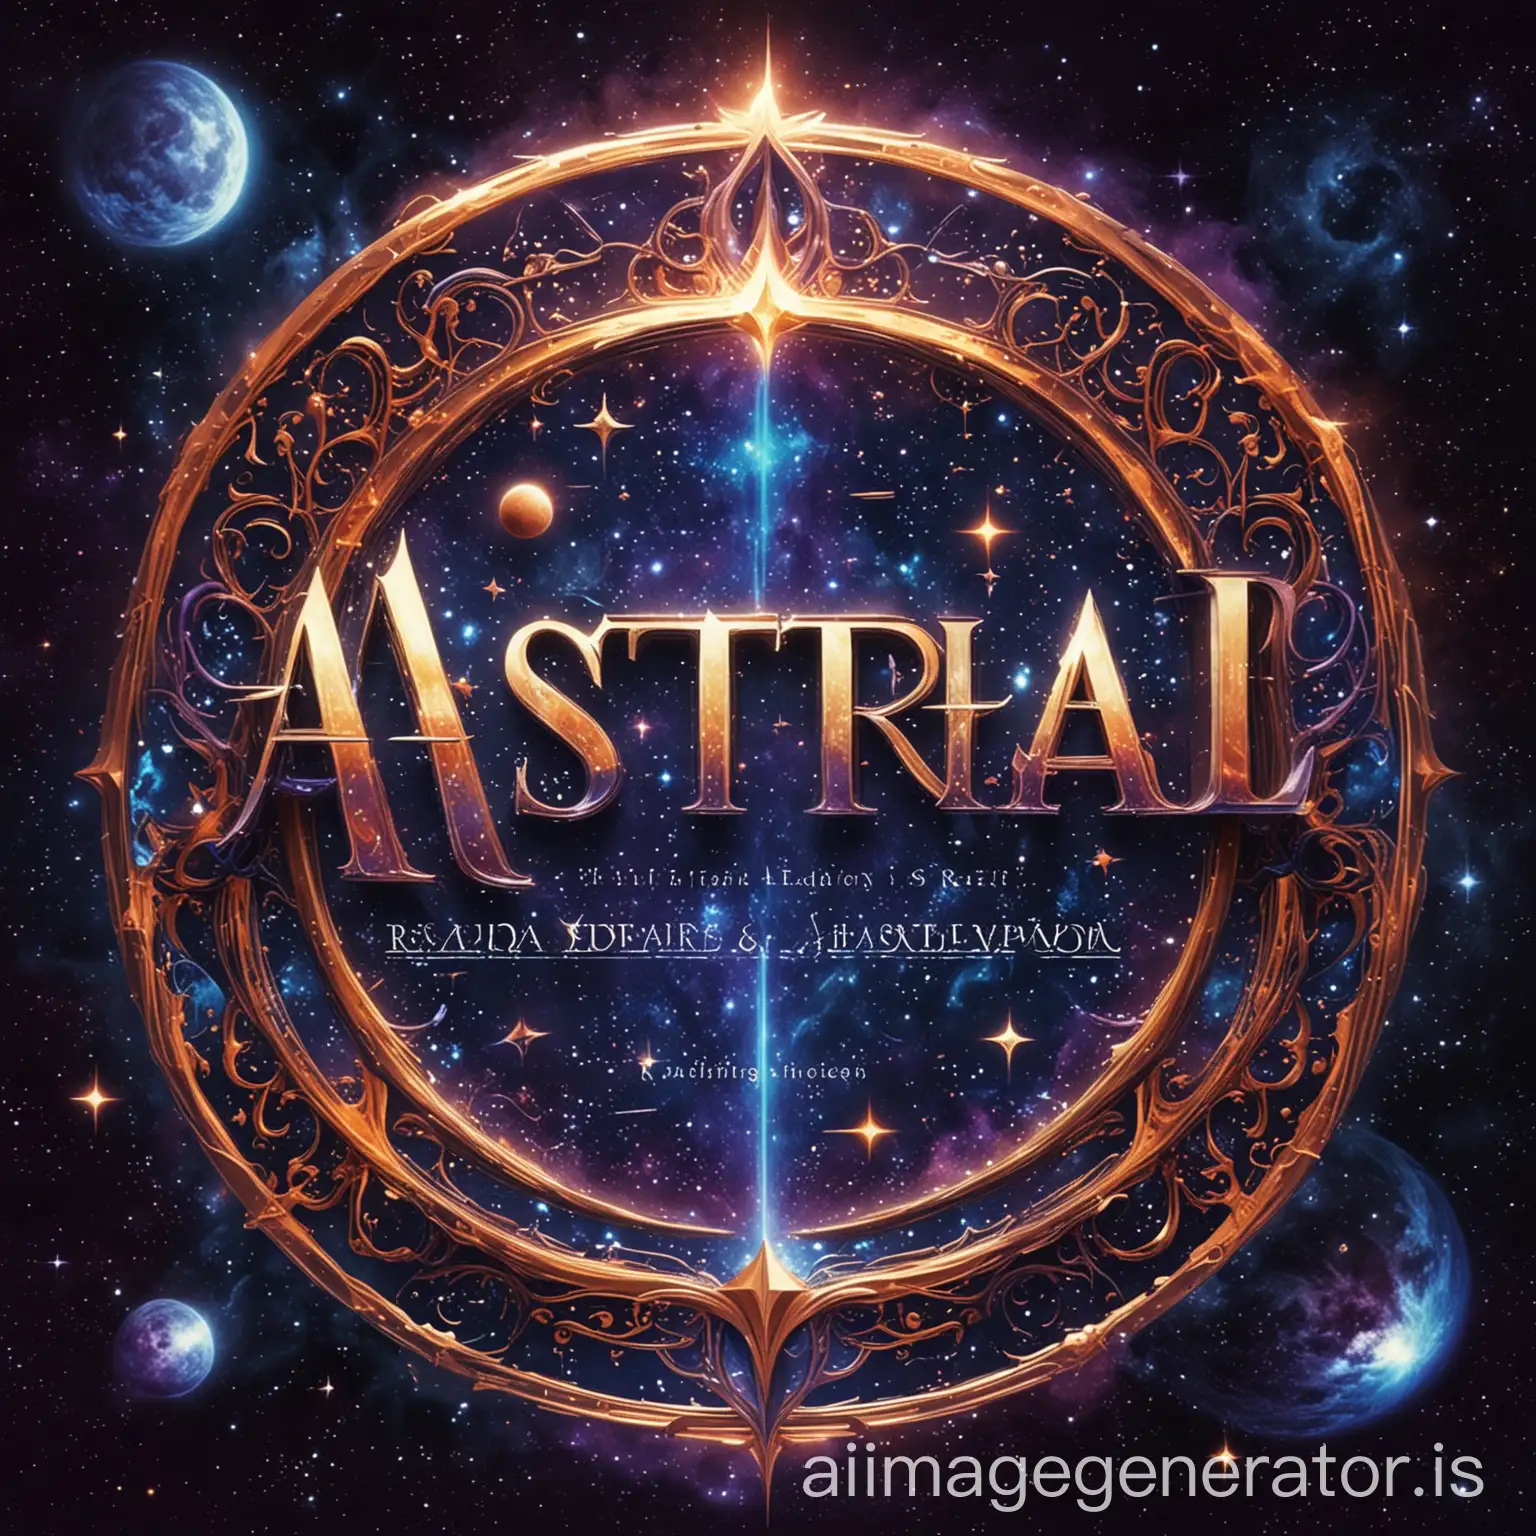 Celestial-Journey-Bold-Script-Font-and-Cosmic-Colors-for-Astral-Redemption